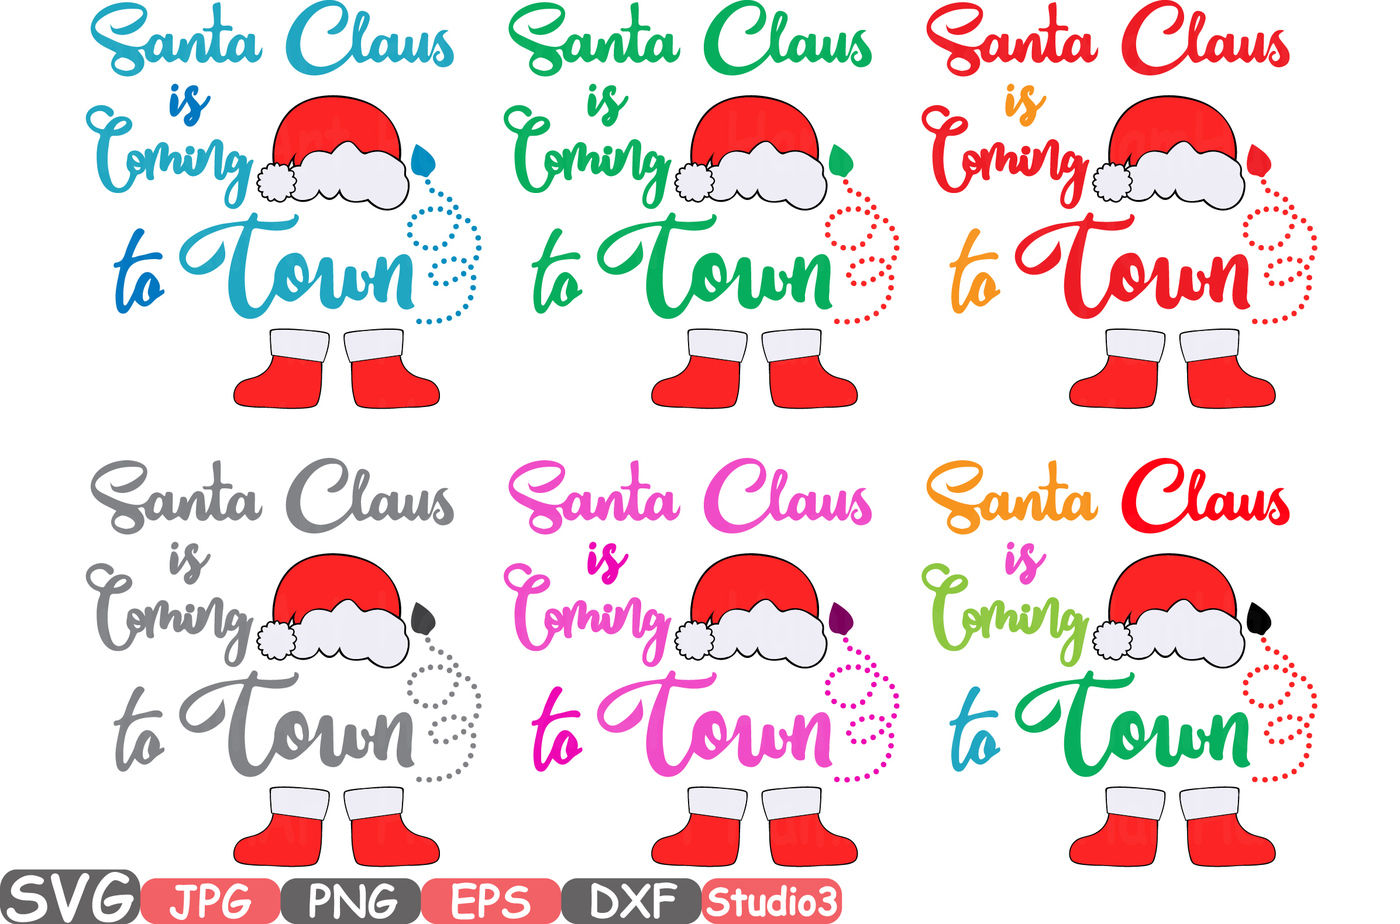 Santa Claus Is Coming To Town Monogram Silhouette Svg Cutting Files Digital Clip Art Graphic Studio3 Cricut Cuttable Die Cut Machines Christmas Shoes Hat 65sv By Hamhamart Thehungryjpeg Com